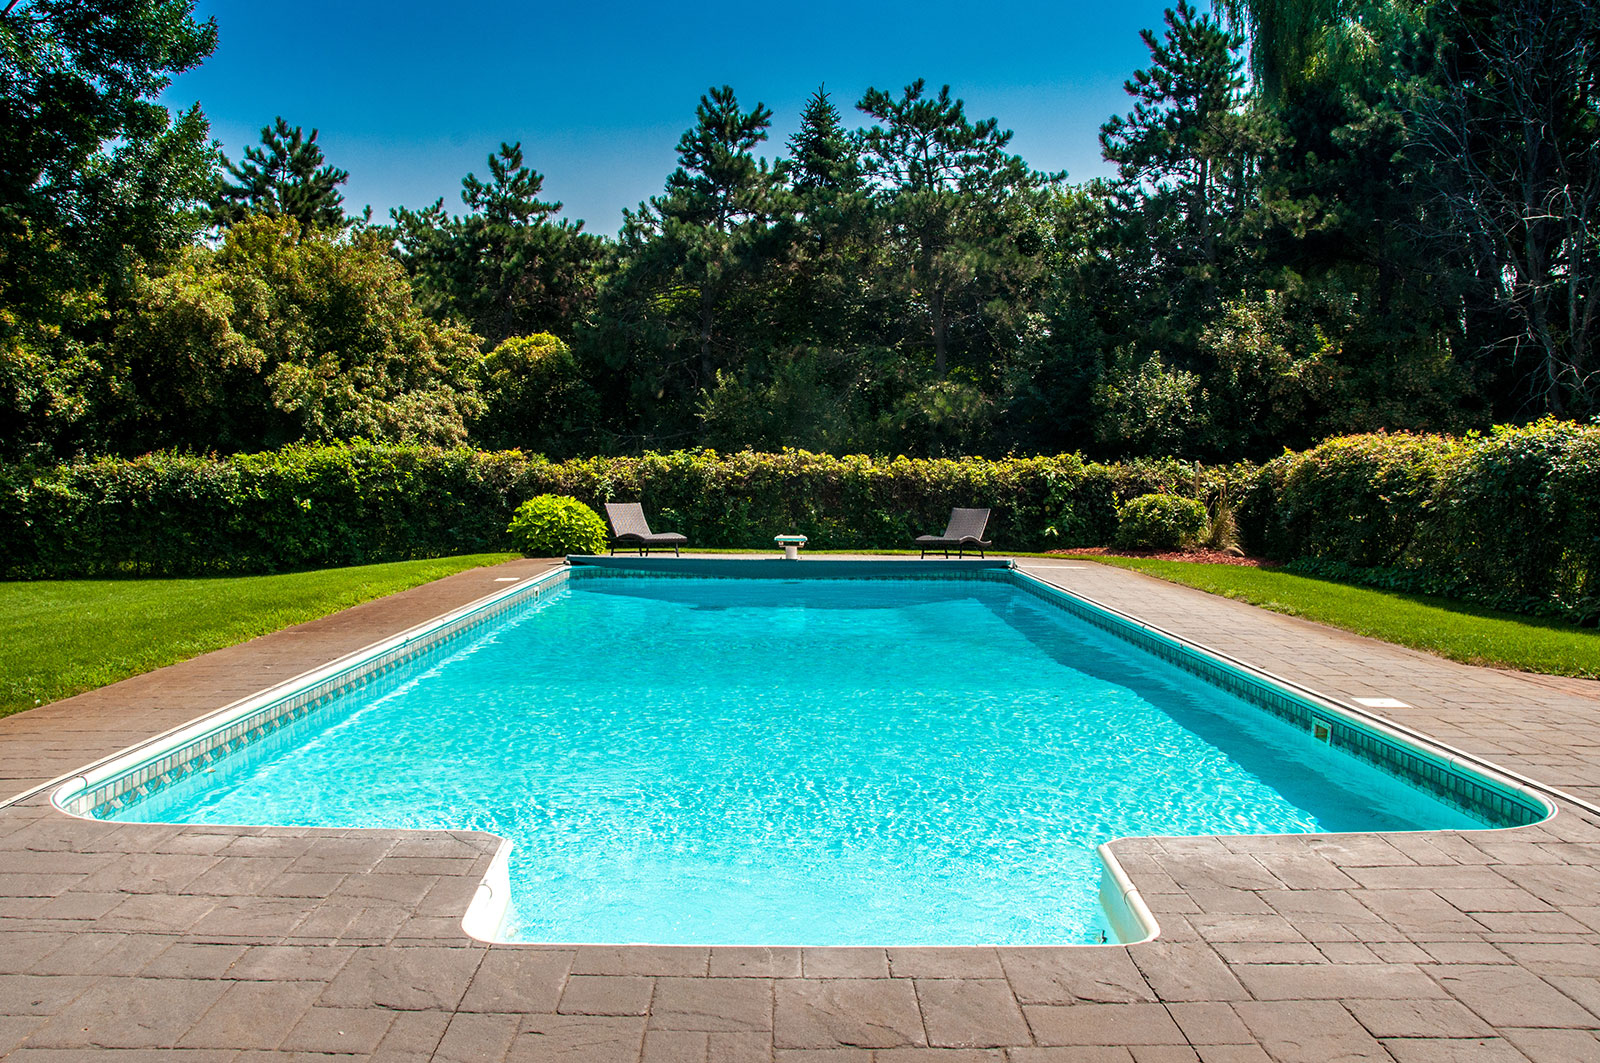 Best Pool Shape for Small Backyard: How to Maximize Your Space